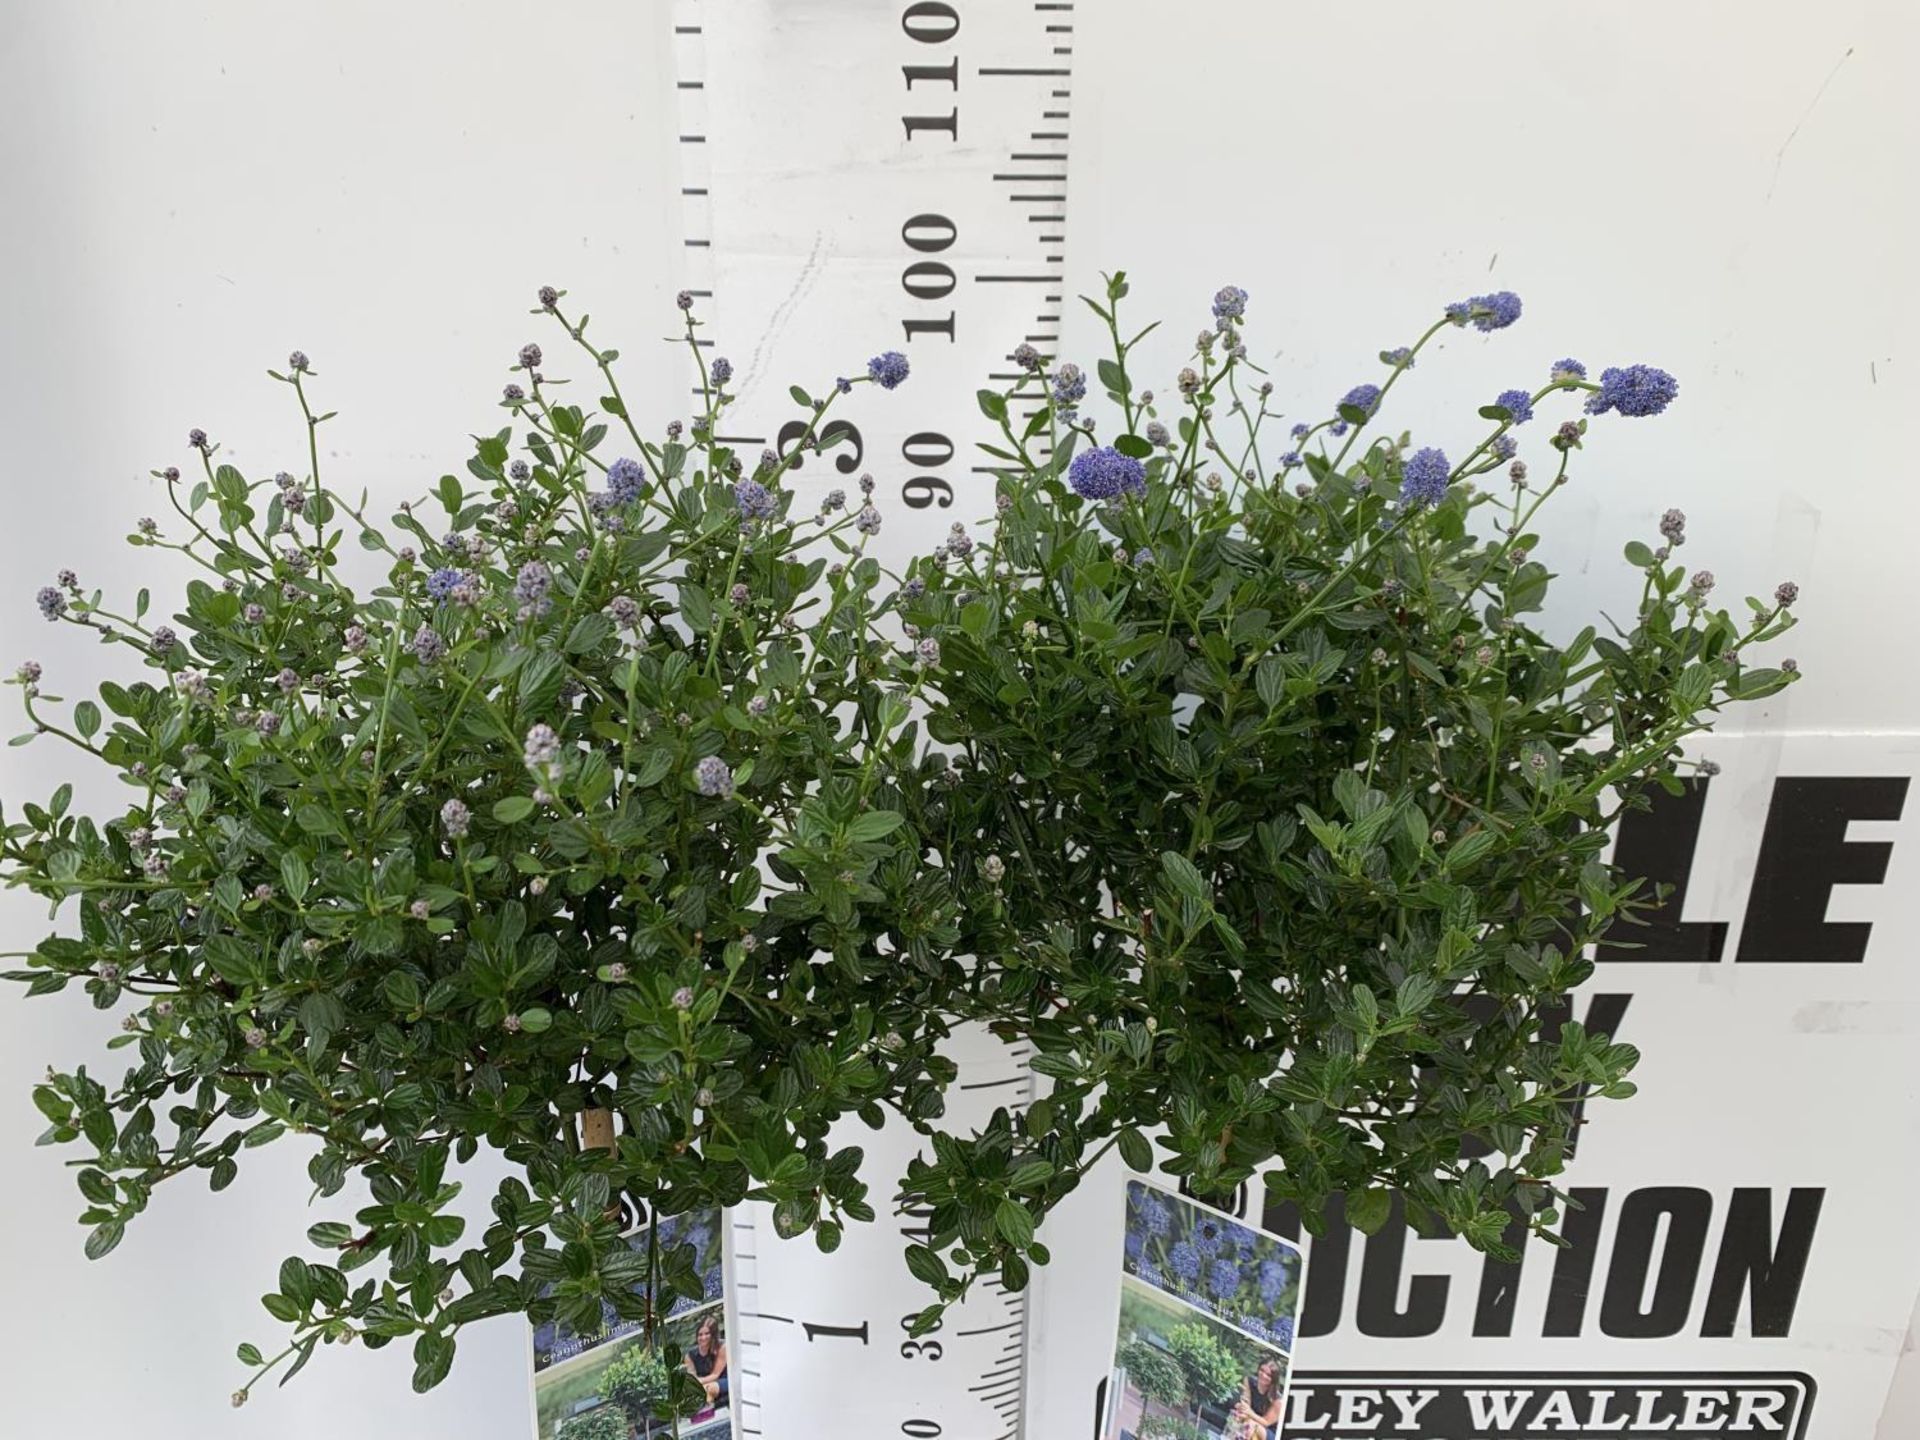 TWO CEANOTHUS IMPRESSUS STANDARD TREES 'VICTORIA' IN FLOWER APPROX 110CM IN HEIGHT IN 3LTR POTS PLUS - Image 4 of 10